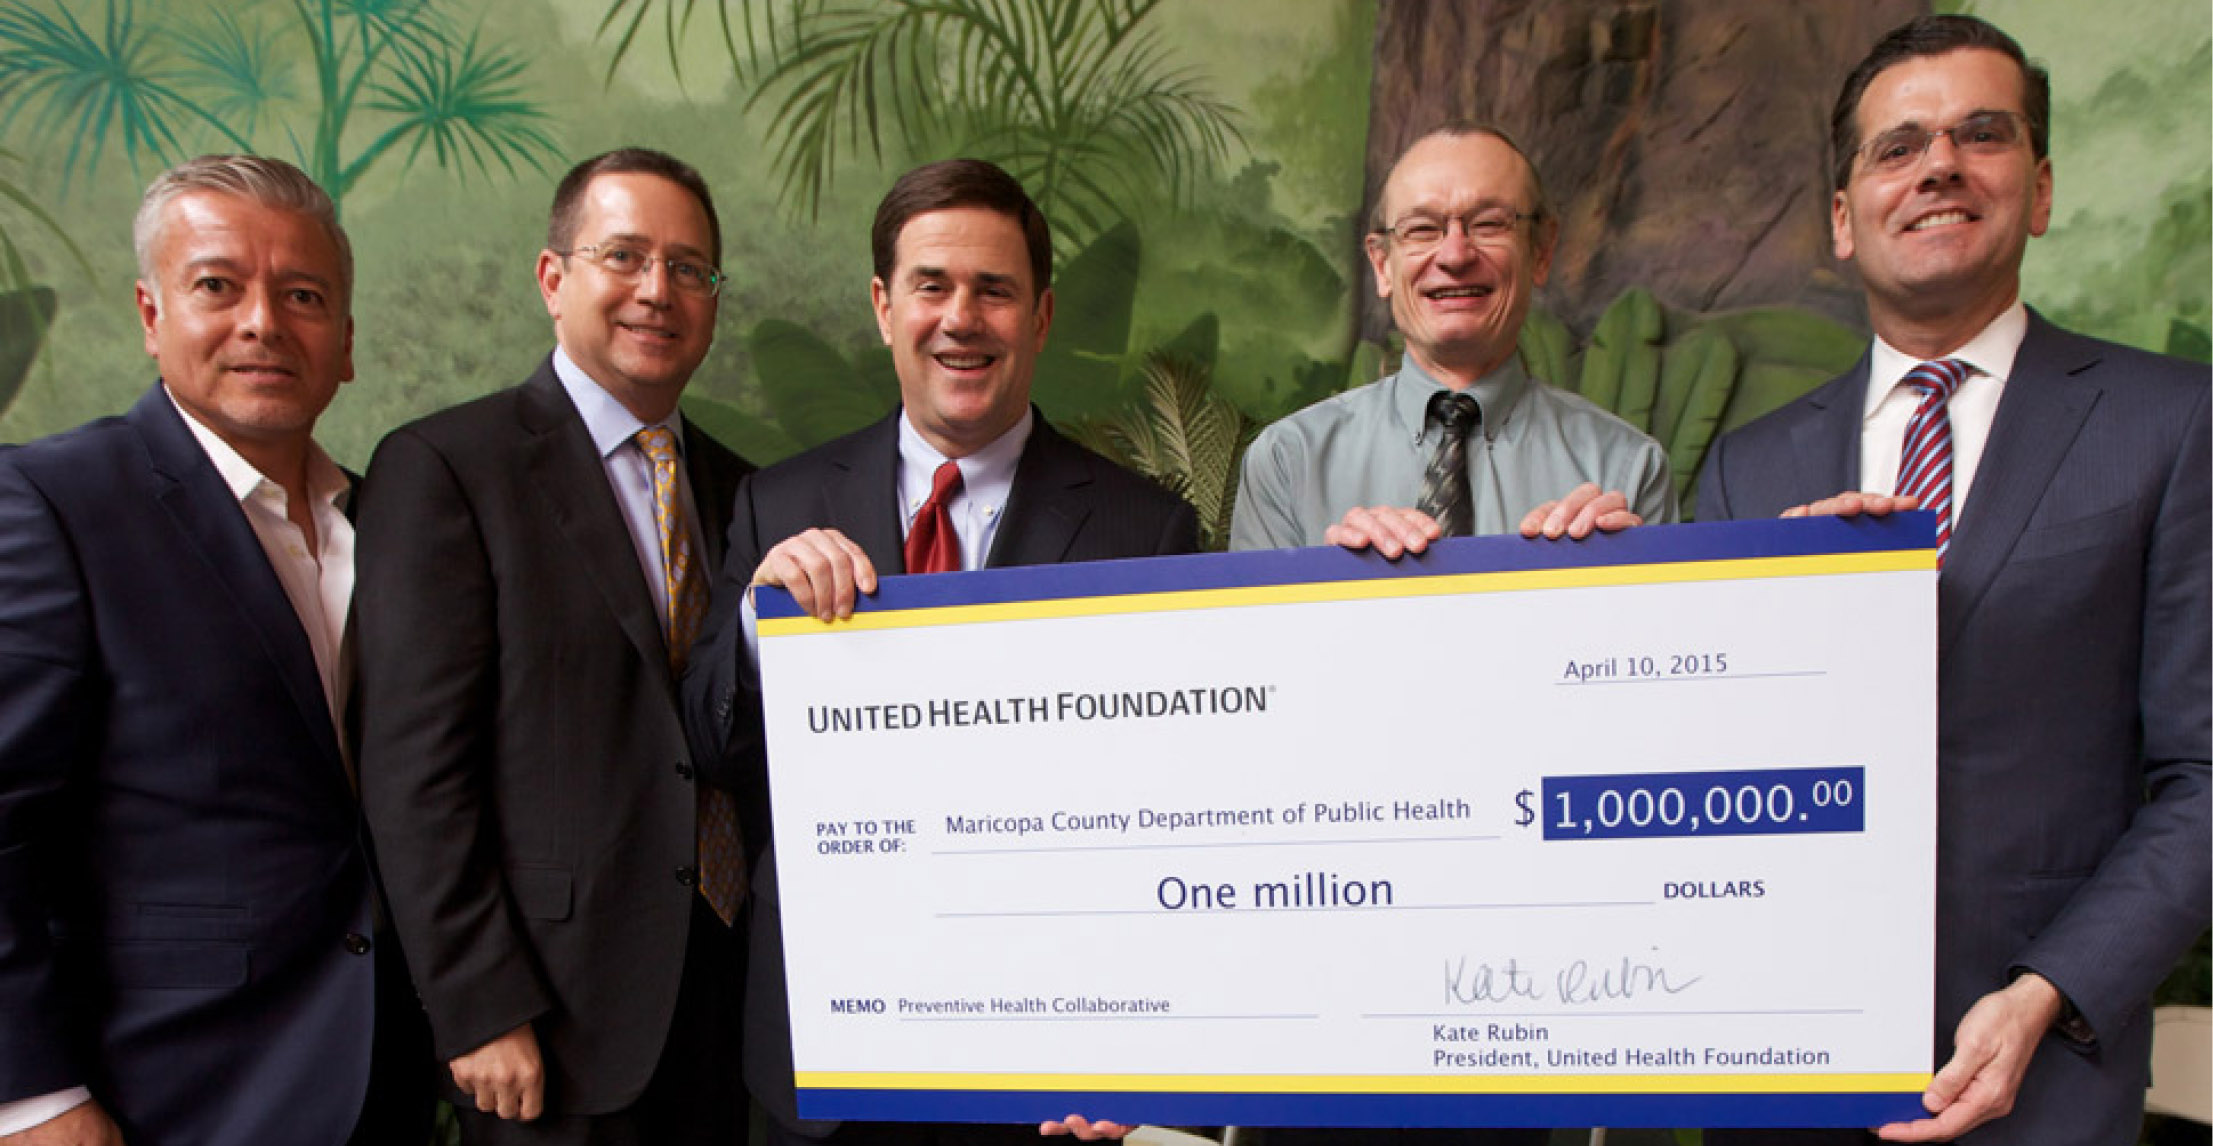 United Health Foundation check issuance to Maricopa County